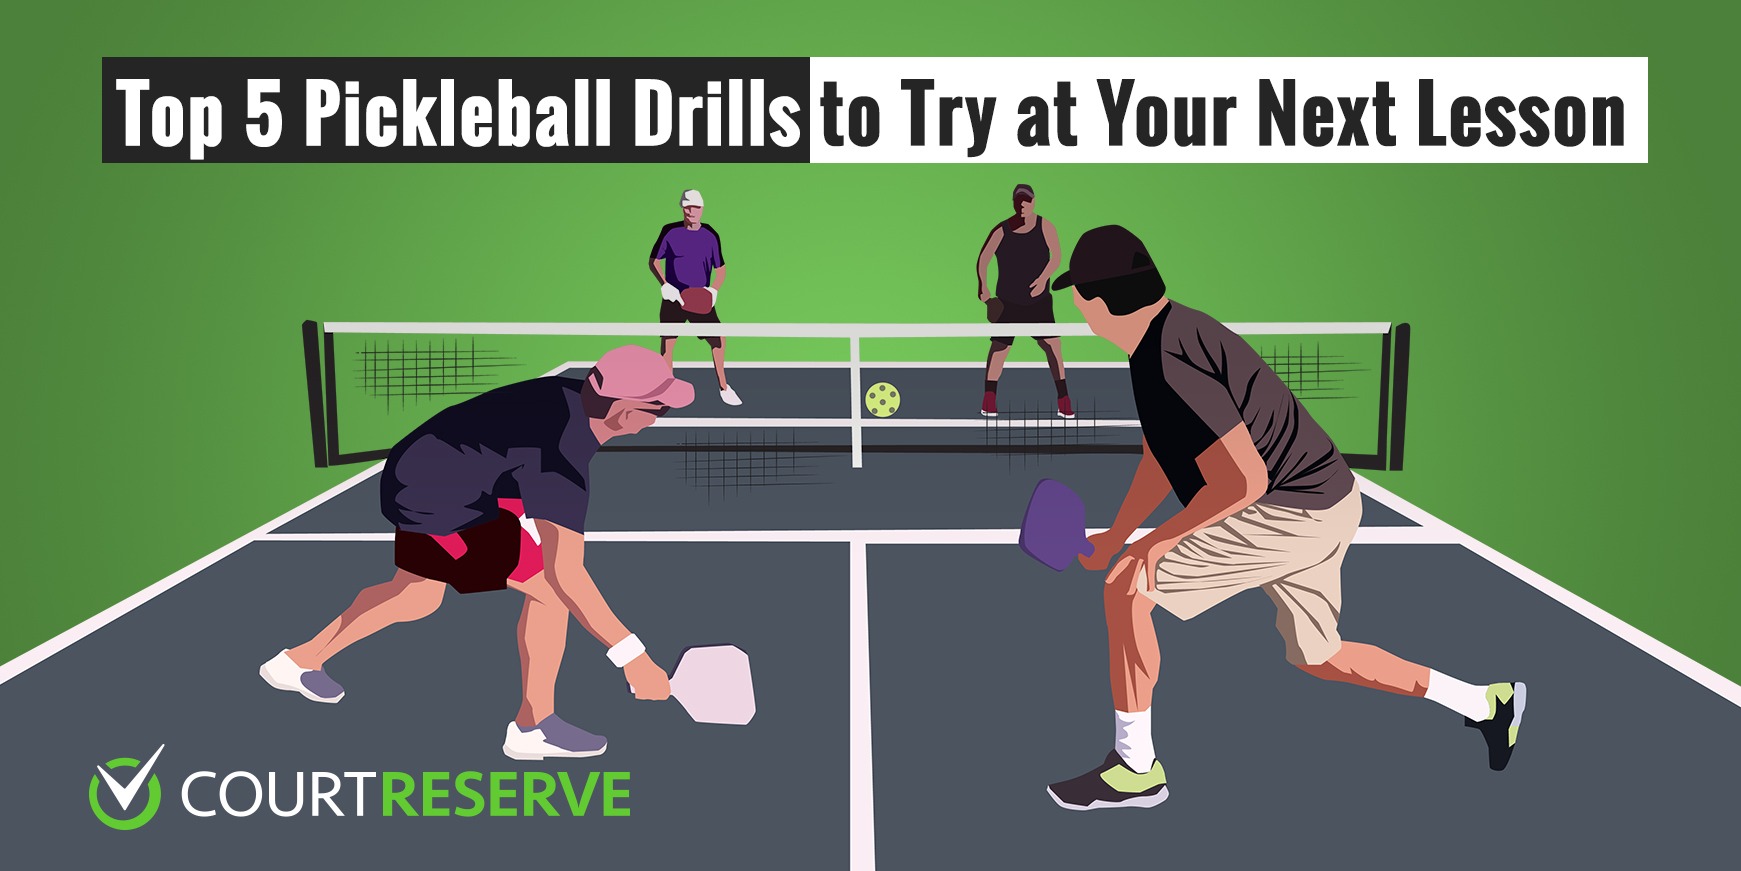 Top 5 Pickleball Drills to Try at Your Next Lesson